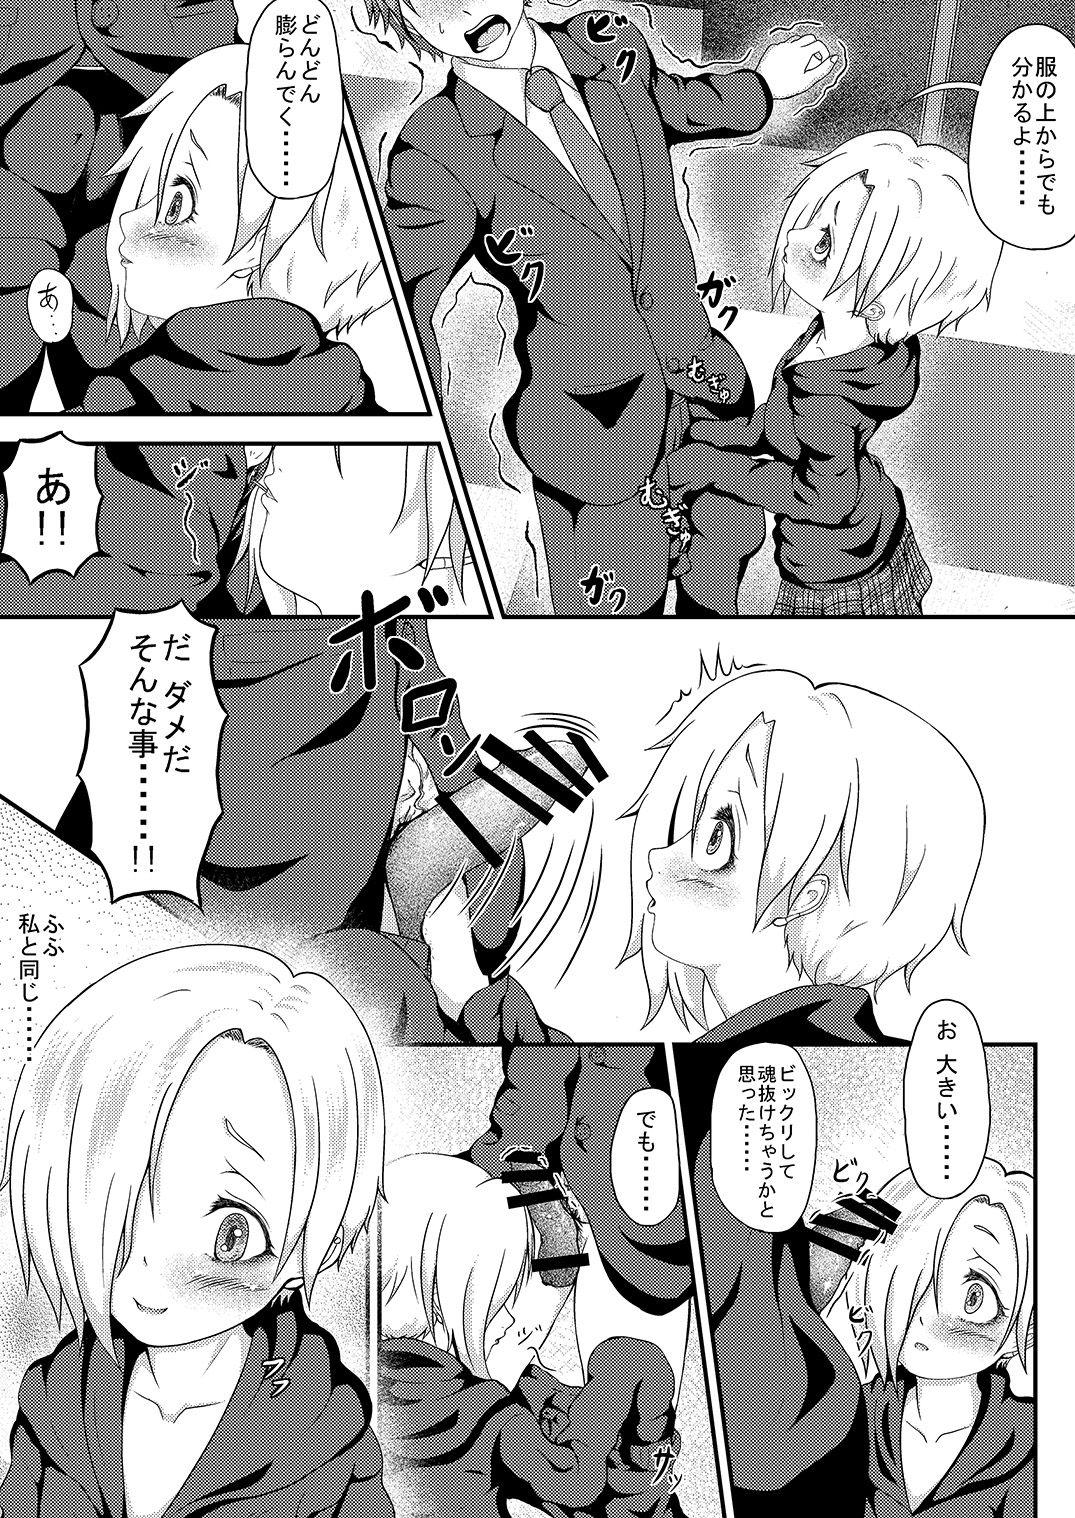 Perra The H-aunting of Koume-chan - The idolmaster Stripping - Page 7